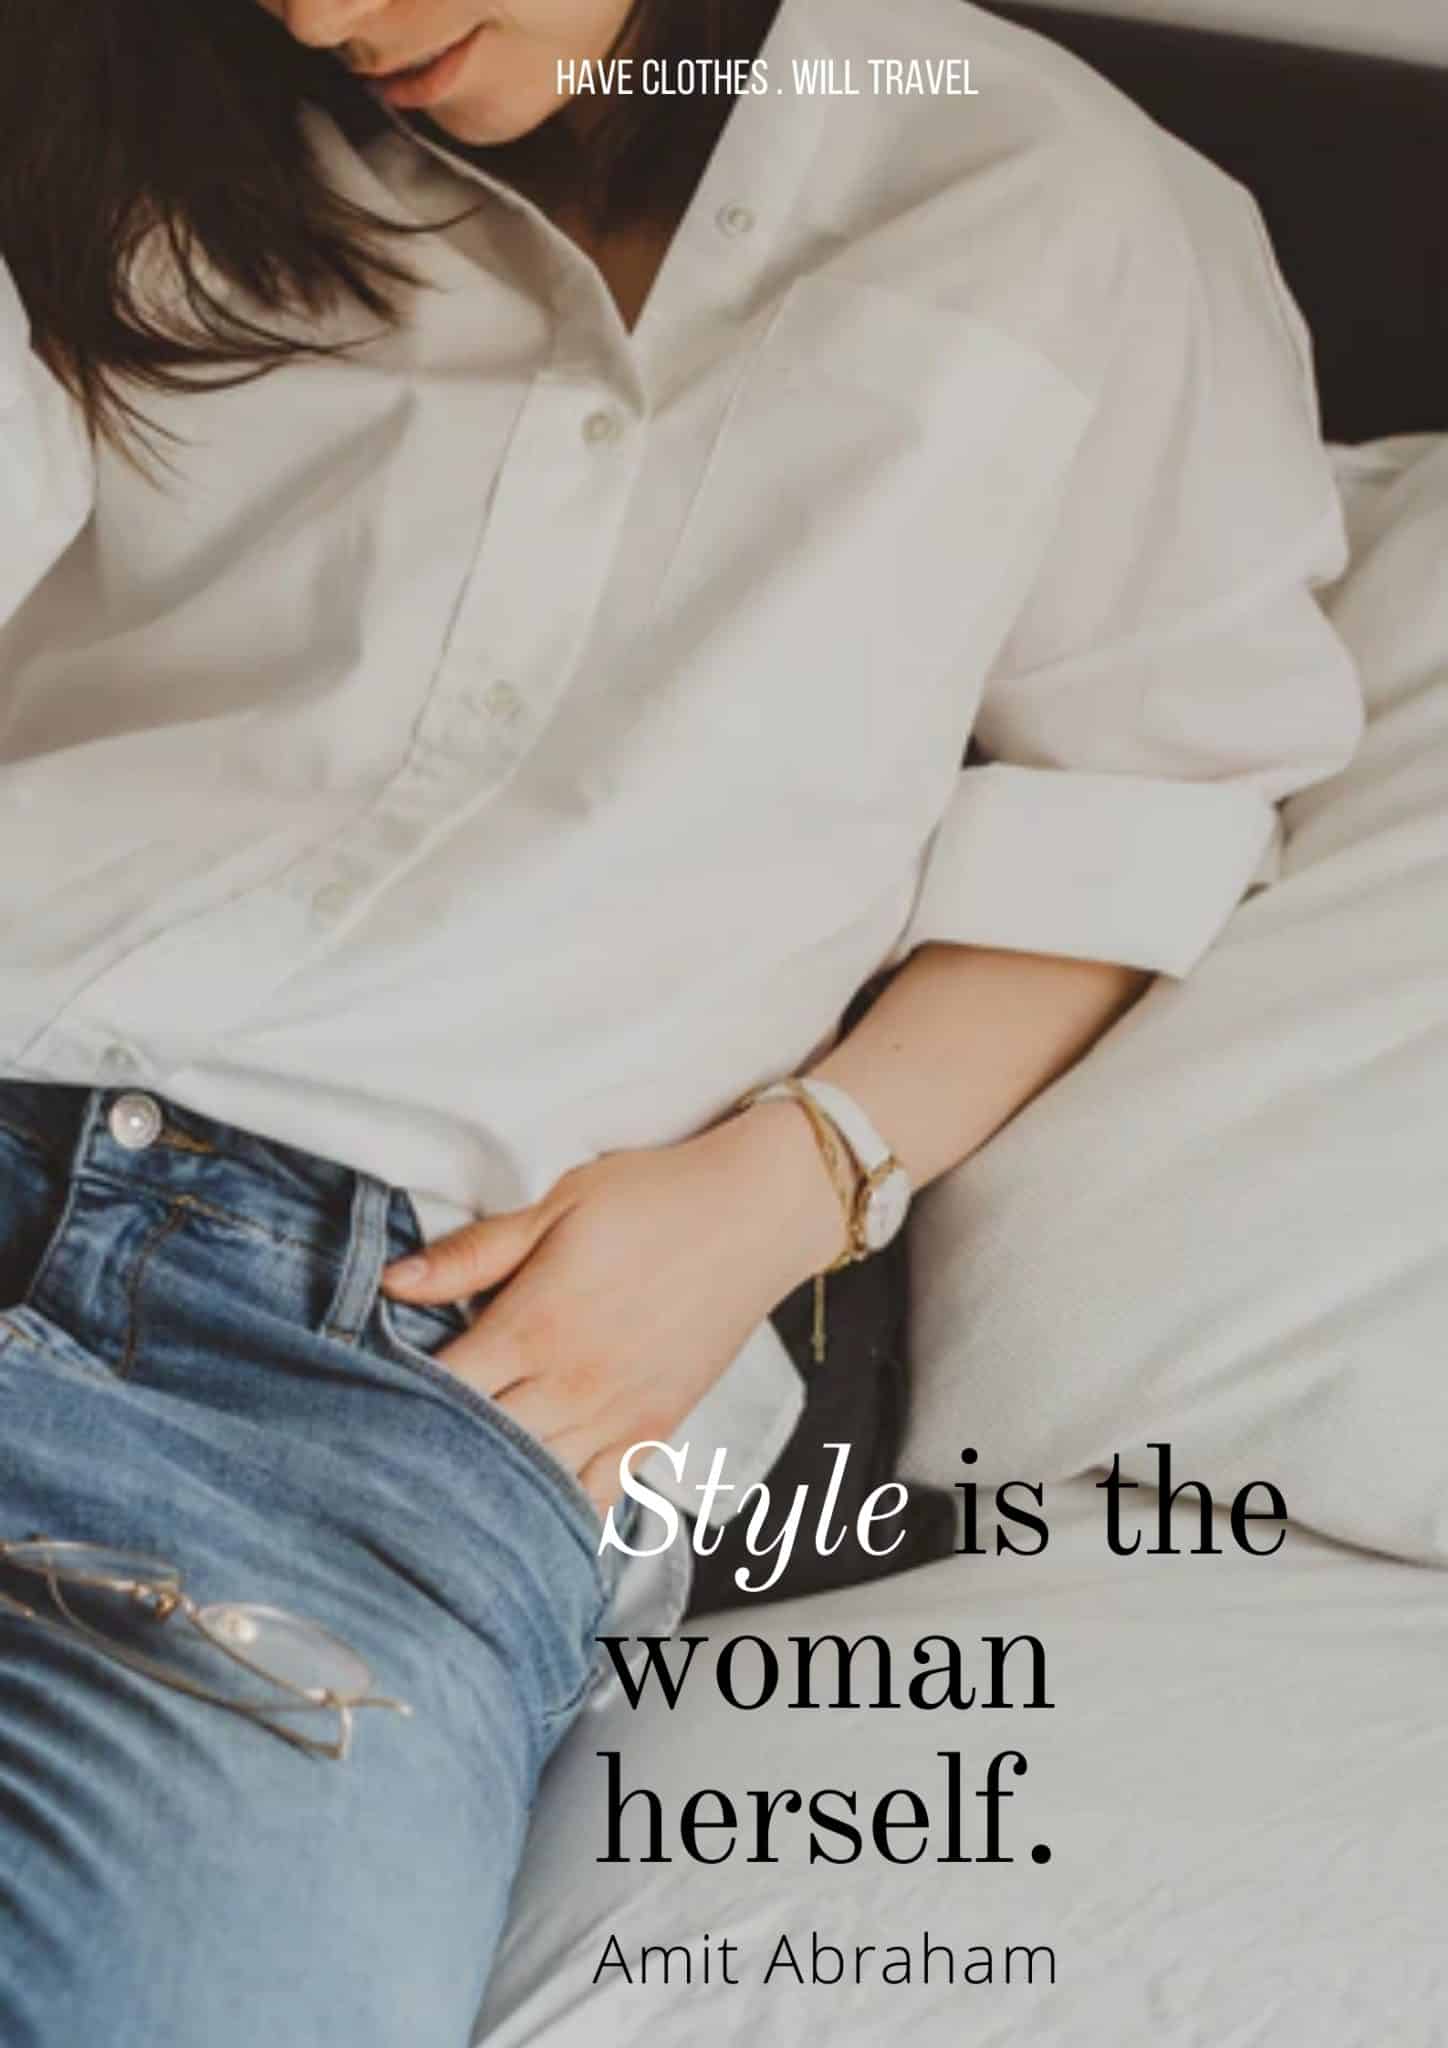 A minimalistic image of a woman wearing a simple white shirt and jeans while resting in bed. Text on the image reads, "Style is the woman herself. - Amit Abraham"